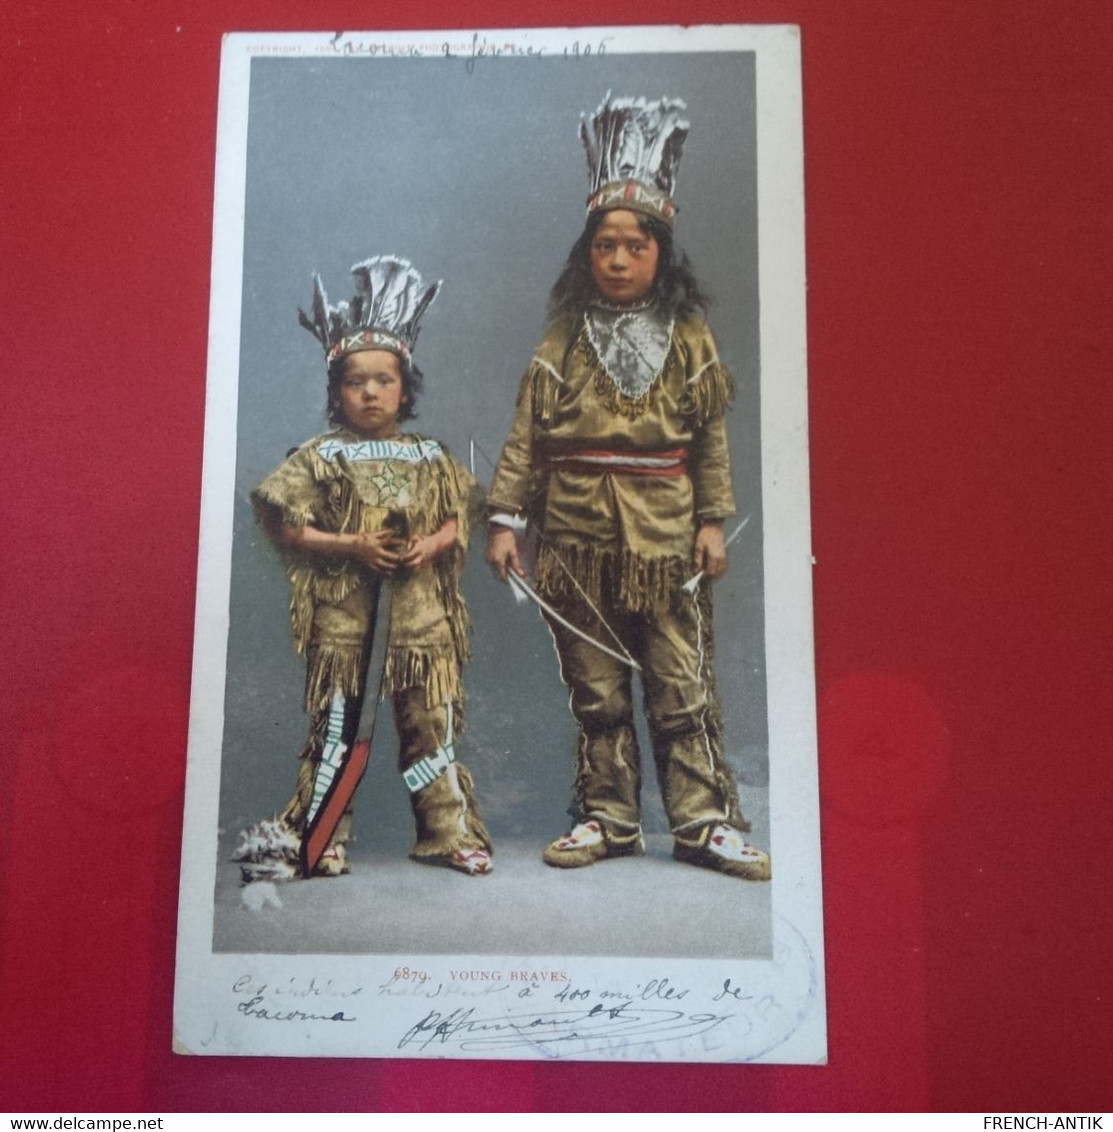 INDIAN YOUNG BRAVES - Native Americans